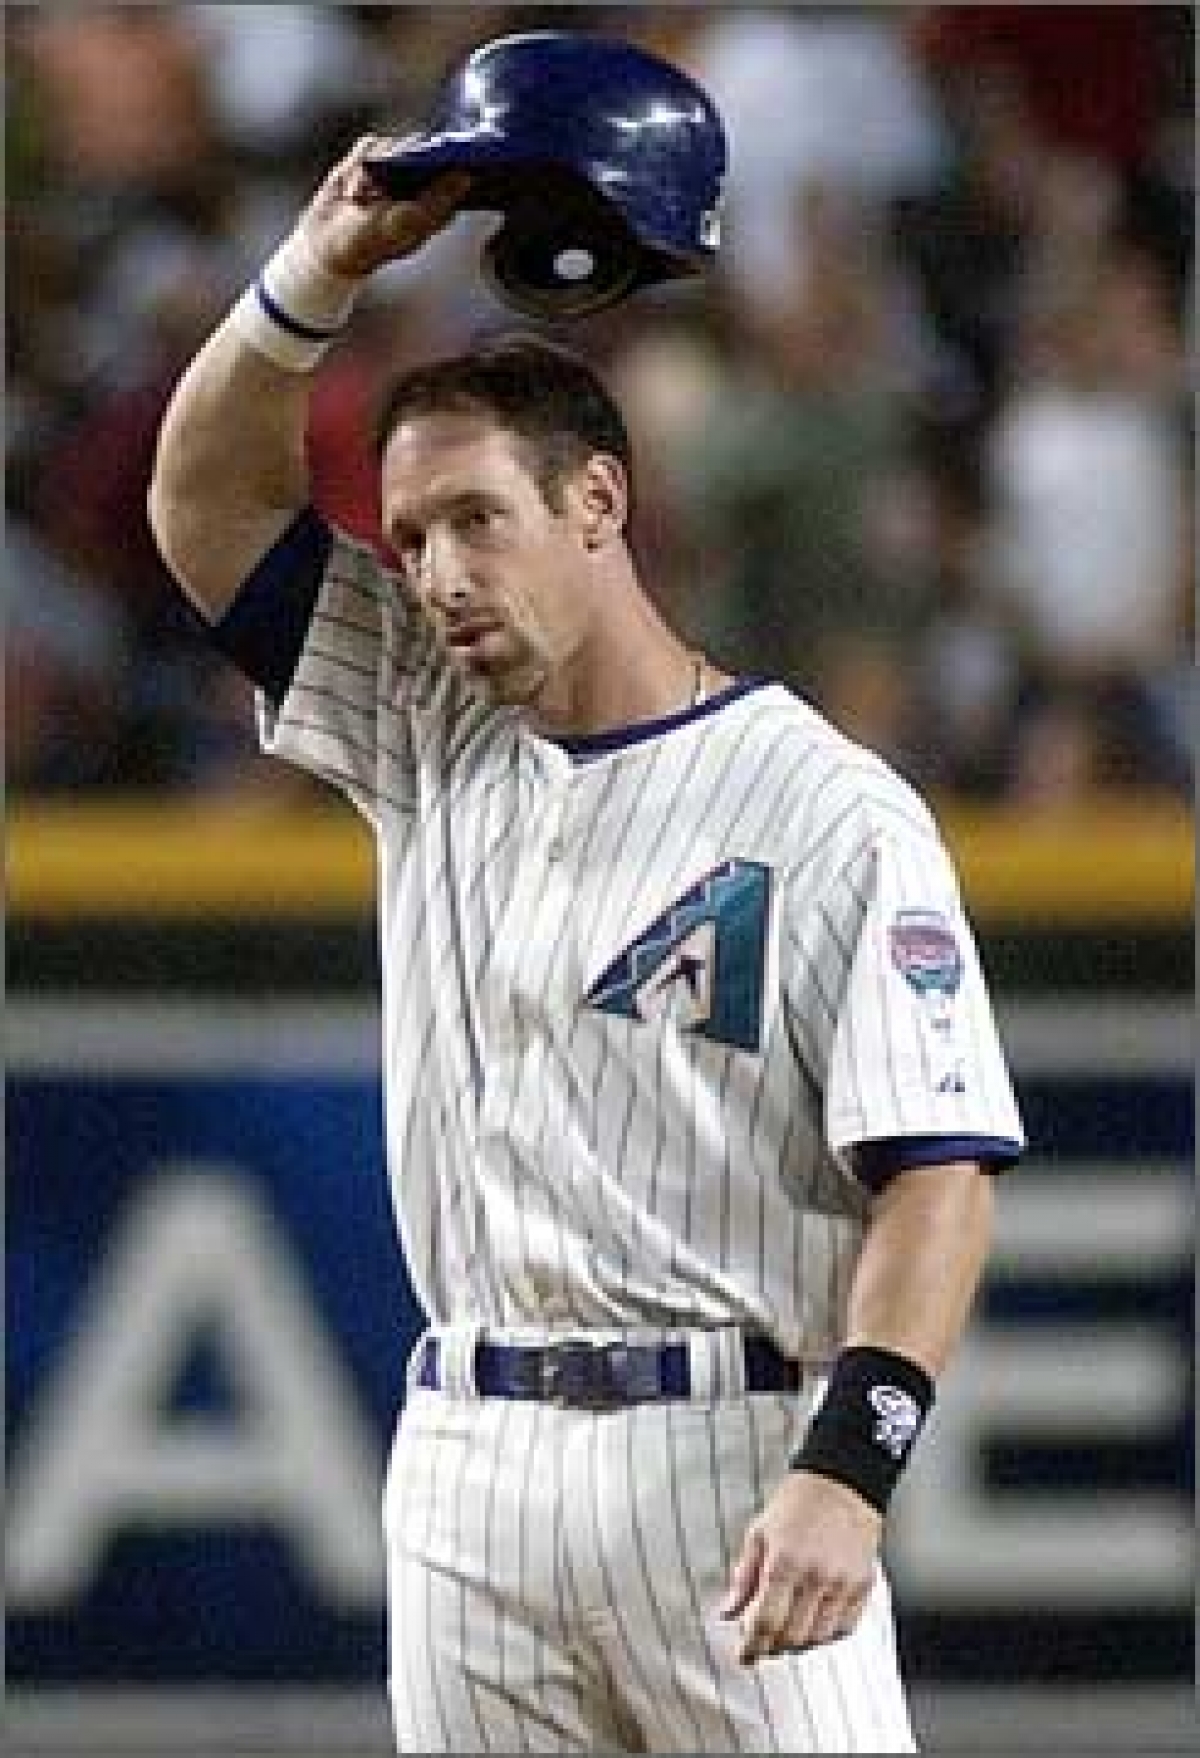 Not in Hall of Fame - 5. Luis Gonzalez